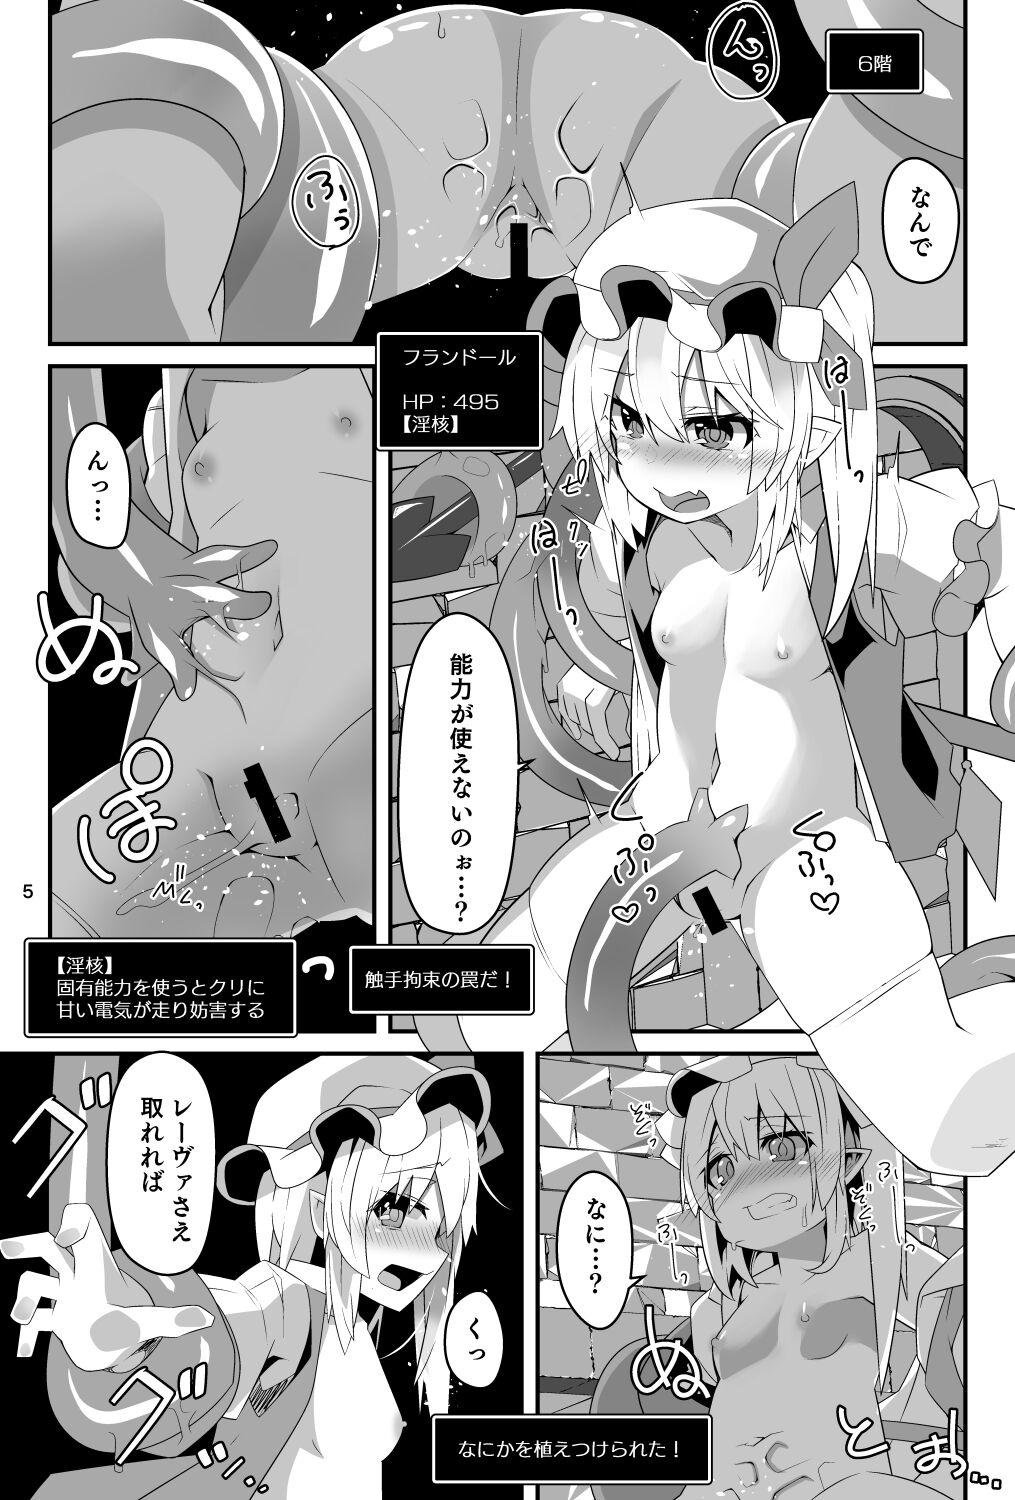 Ameteur Porn Flan-chan no Ero Trap Dungeon Accept Stigma - Touhou project Gapes Gaping Asshole - Page 5